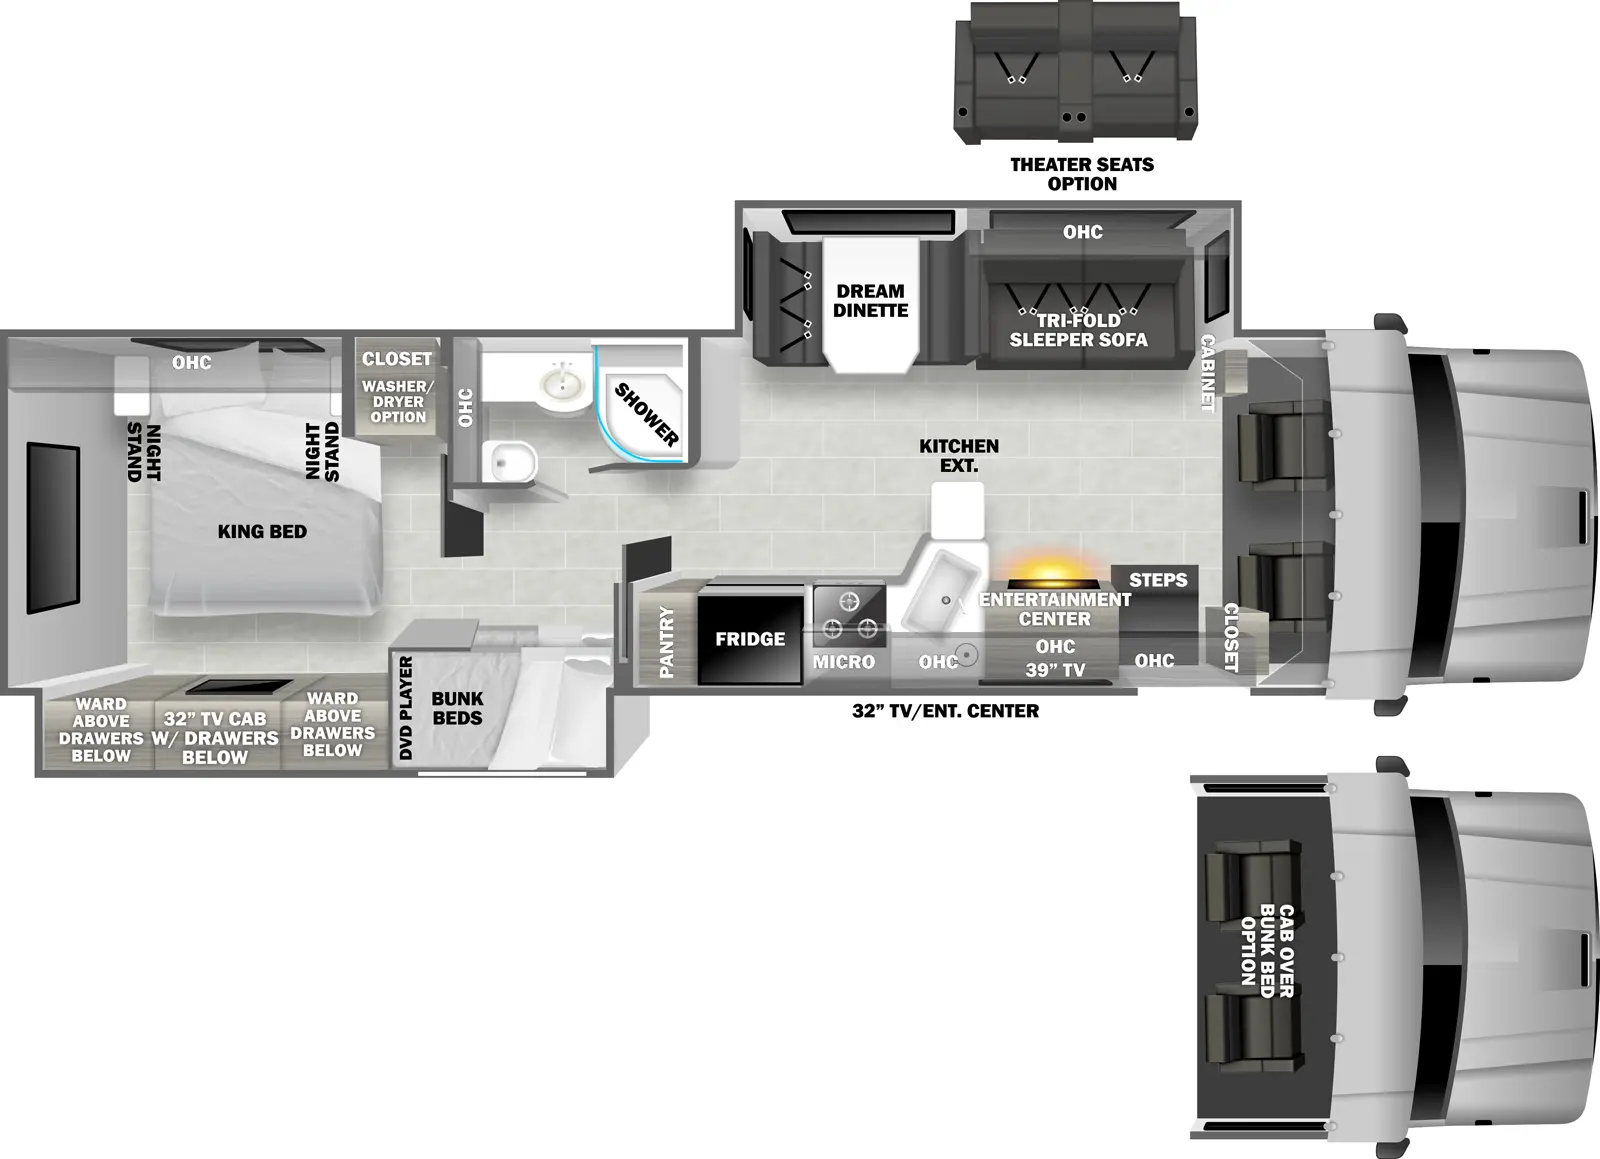 The 3700BD has two slideouts and one entry. Exterior features a TV/entertainment center. Interior layout front to back: cockpit (optional cab over bunk bed); off-door side cabinet, and slideout with tri-fold sleeper sofa (optional theater seating) with overhead cabinets, and dream dinette; door side closet, entry, entertainment center with TV, overhead cabinet, kitchen counter with extension, sink, microwave, cooktop, refrigerator, and pantry; off-door side full bathroom with overhead cabinet; door side slideout with bunk beds with DVD player, and bedroom wardrobe with TV and drawers below; rear bedroom with off-door side closet with washer/dryer option, and side-facing king bed with overhead cabinet and night stands on each side.